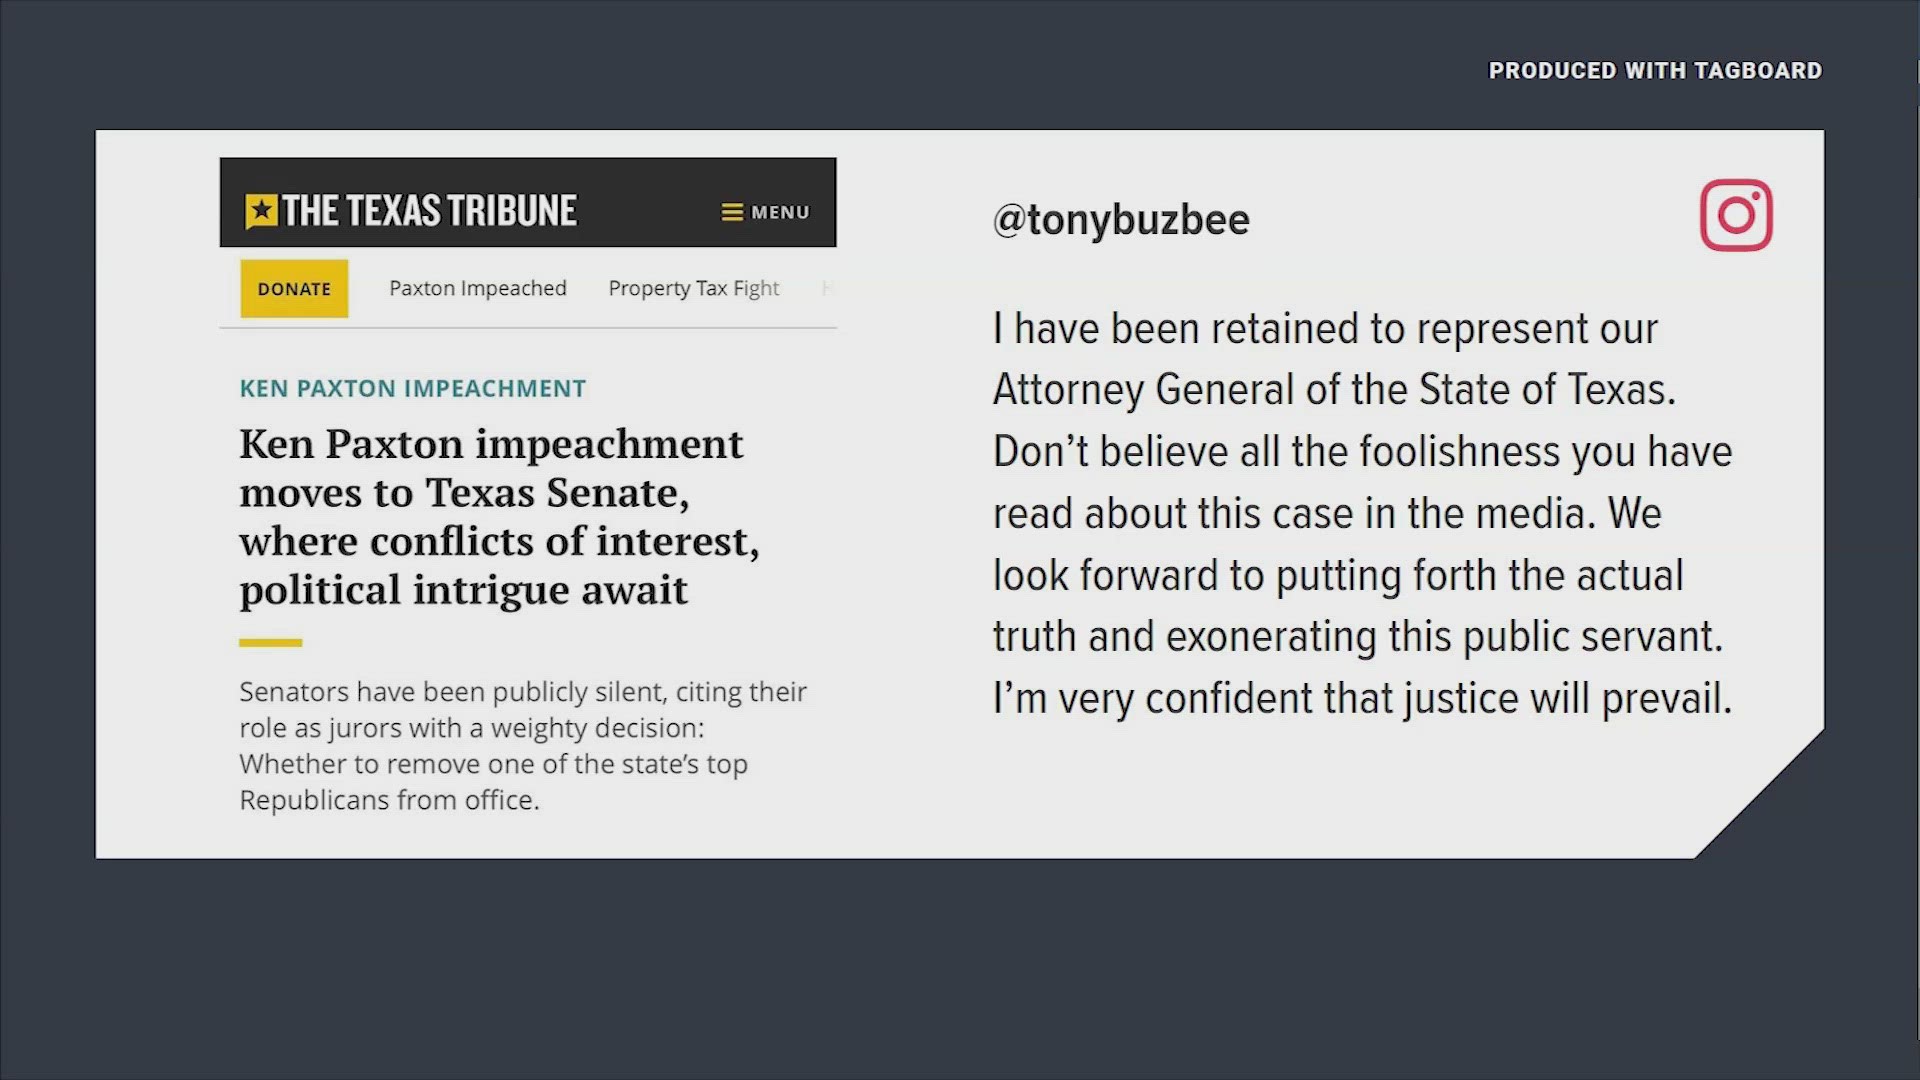 Houston attorney Tony Buzbee posted to Instagram Friday that he will be representing Ken Paxton in his impeachment trial but he then later deleted the post.